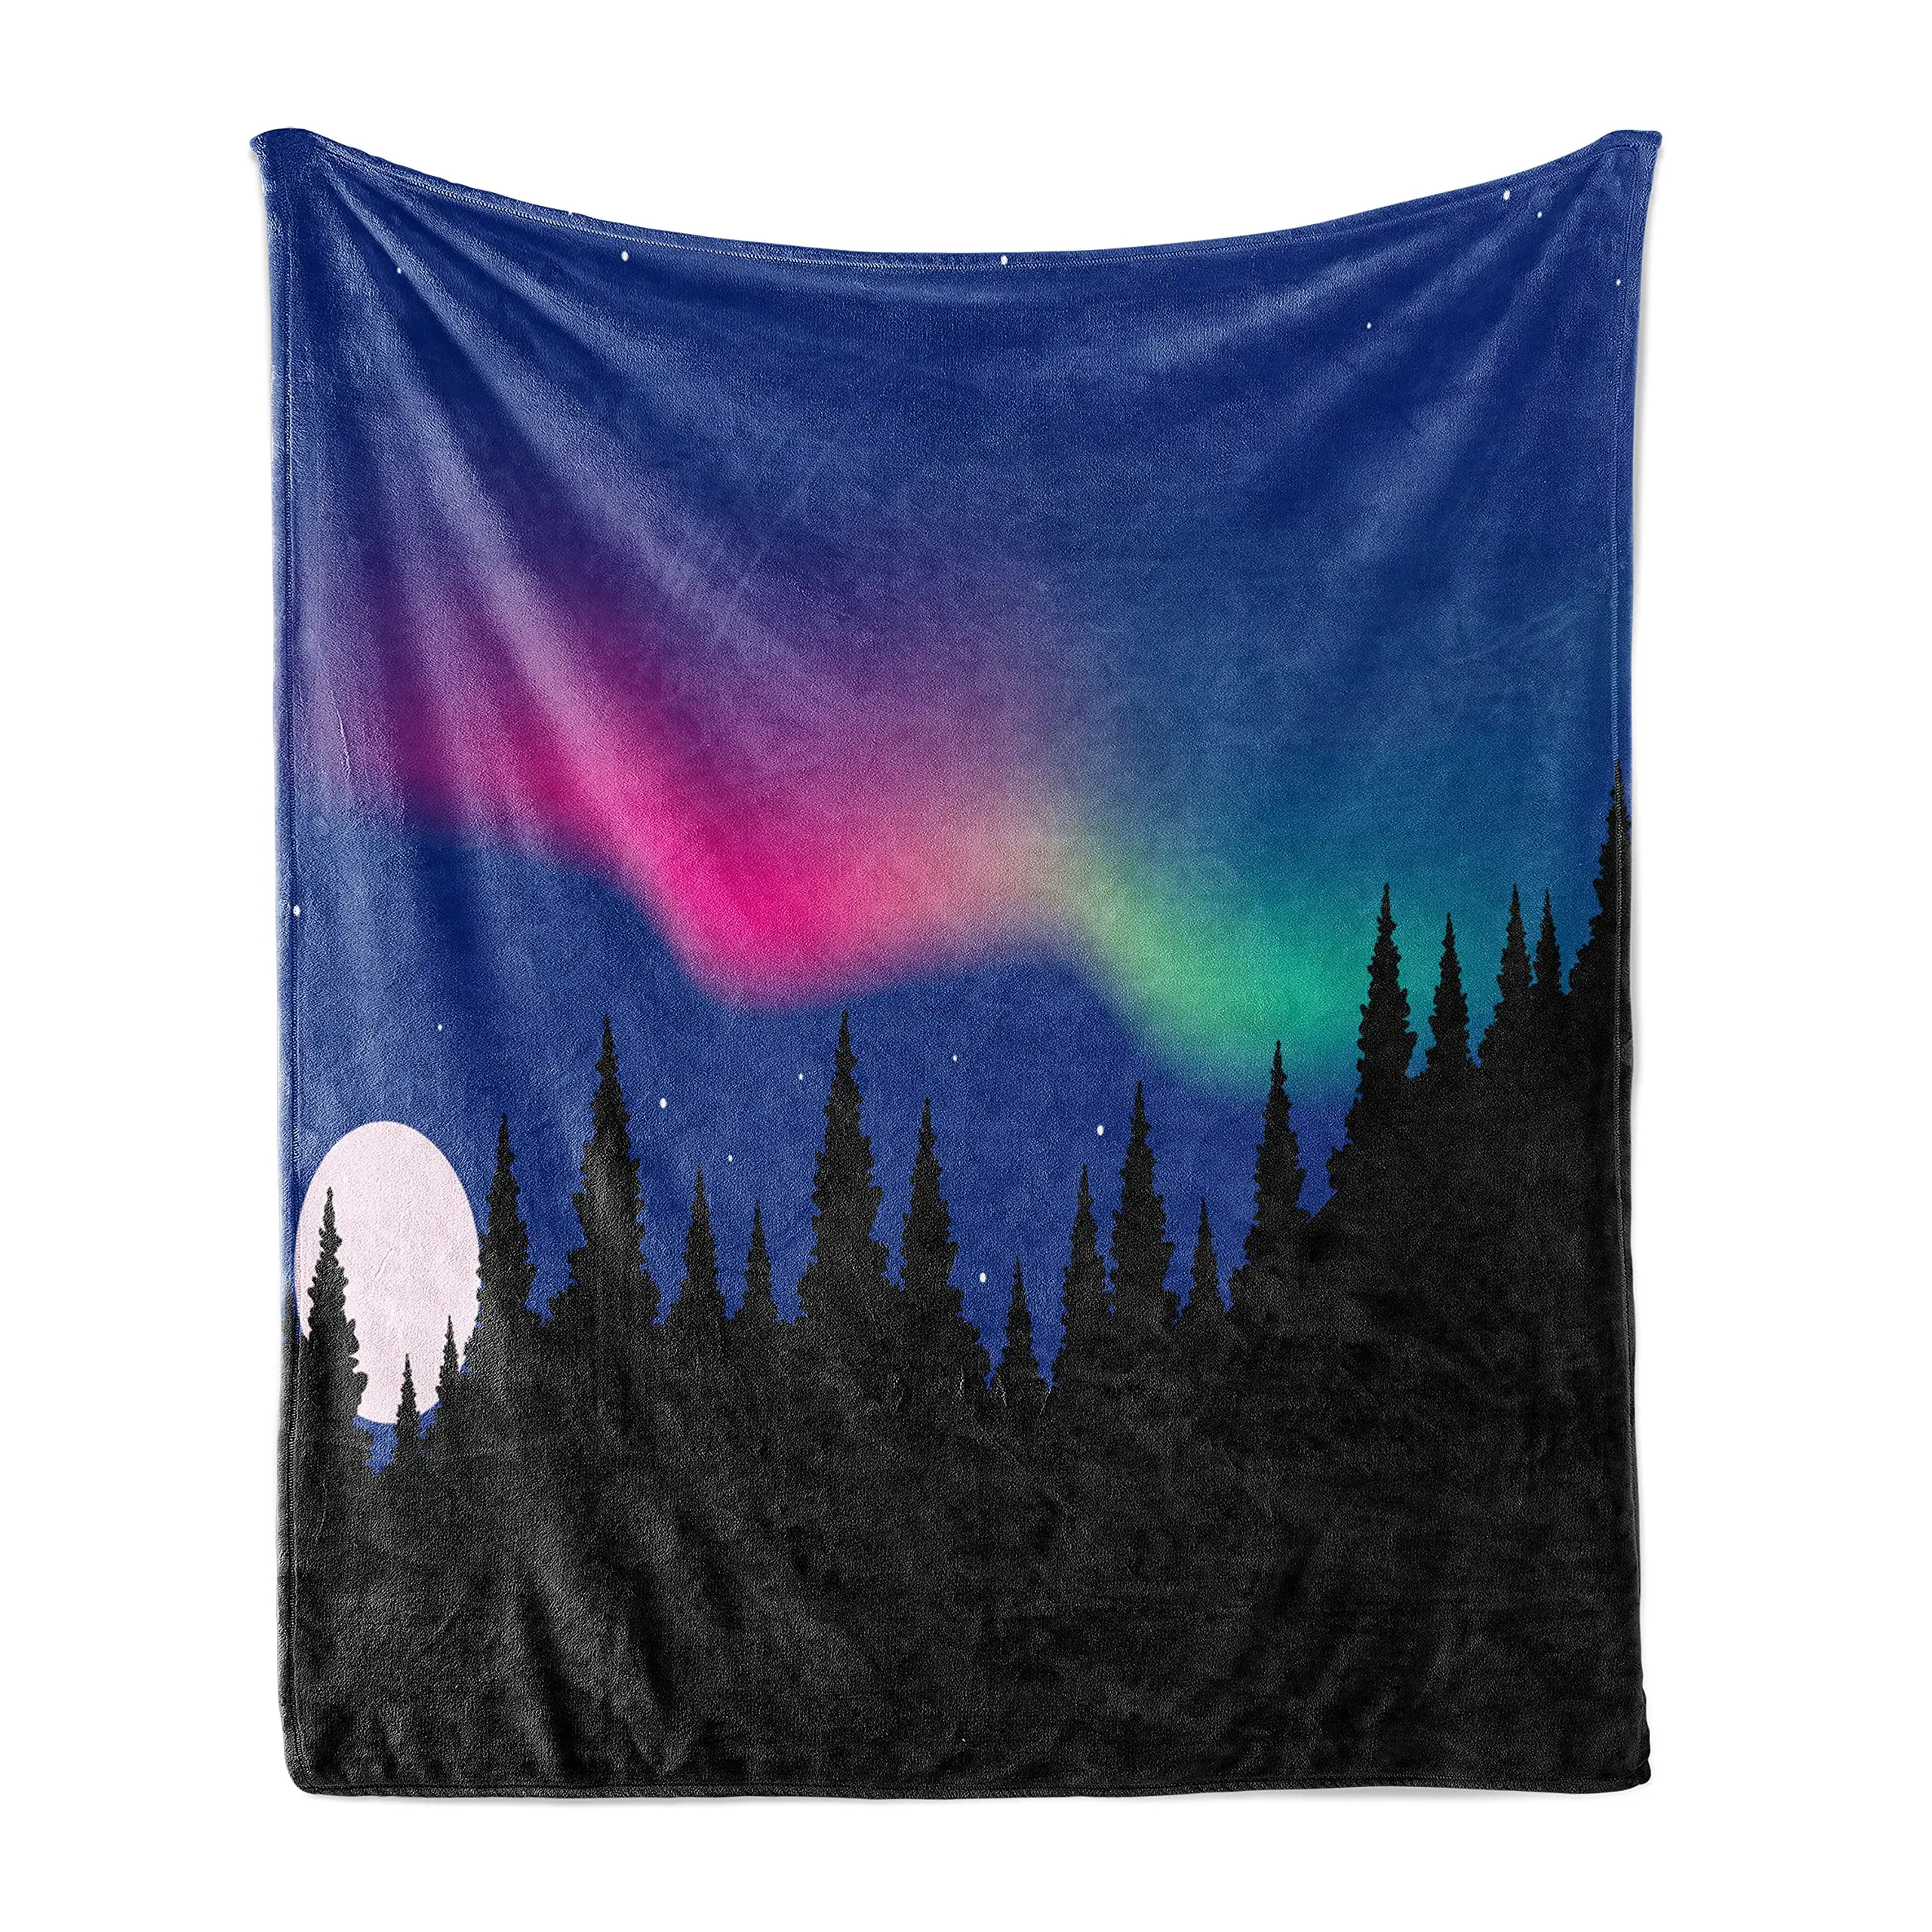 

Blanket for Soft Couch Adults Gifts Galaxy Throw Blanket,Vibrant Stars Space Cosmic Lonely Tree Aurora Borealis Flannel Fleece